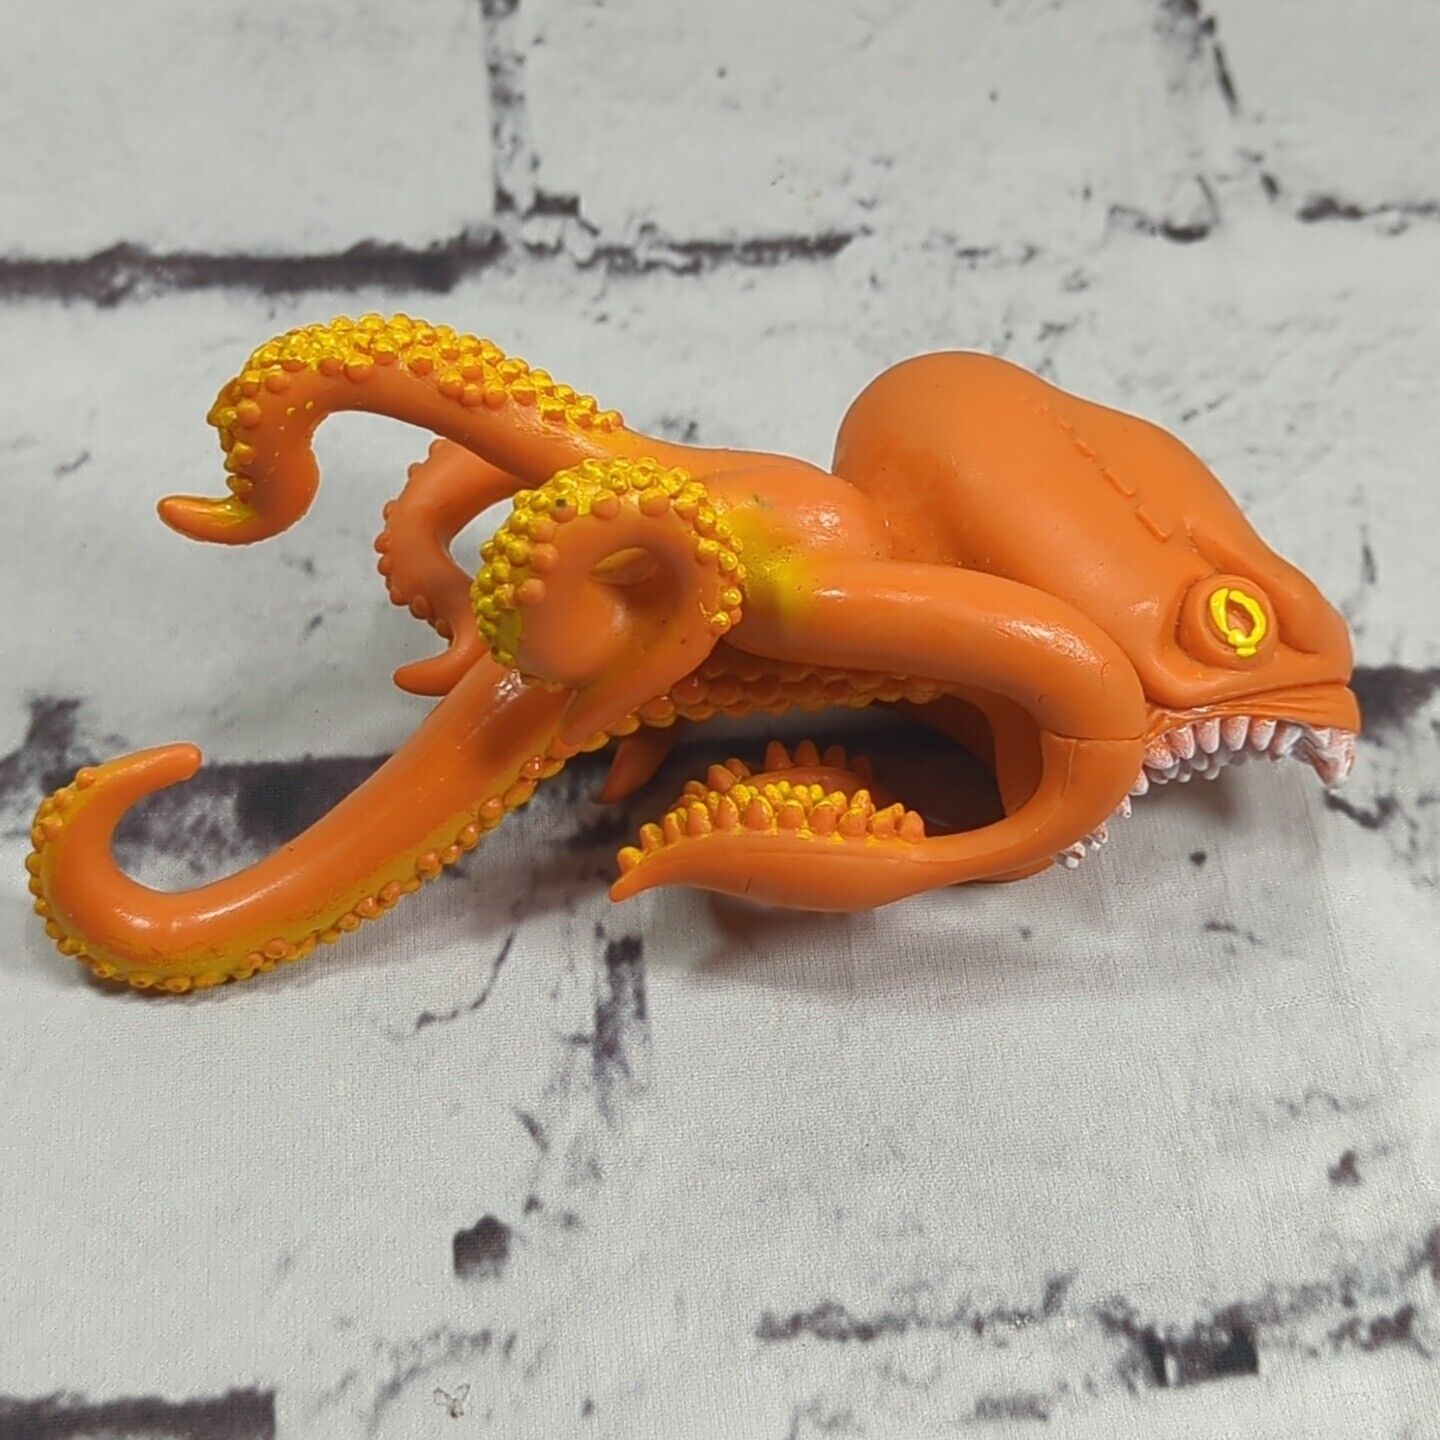 2015 Dave And Busters Sea Monster Isle Punches Orange Squid Drink Figure Toy